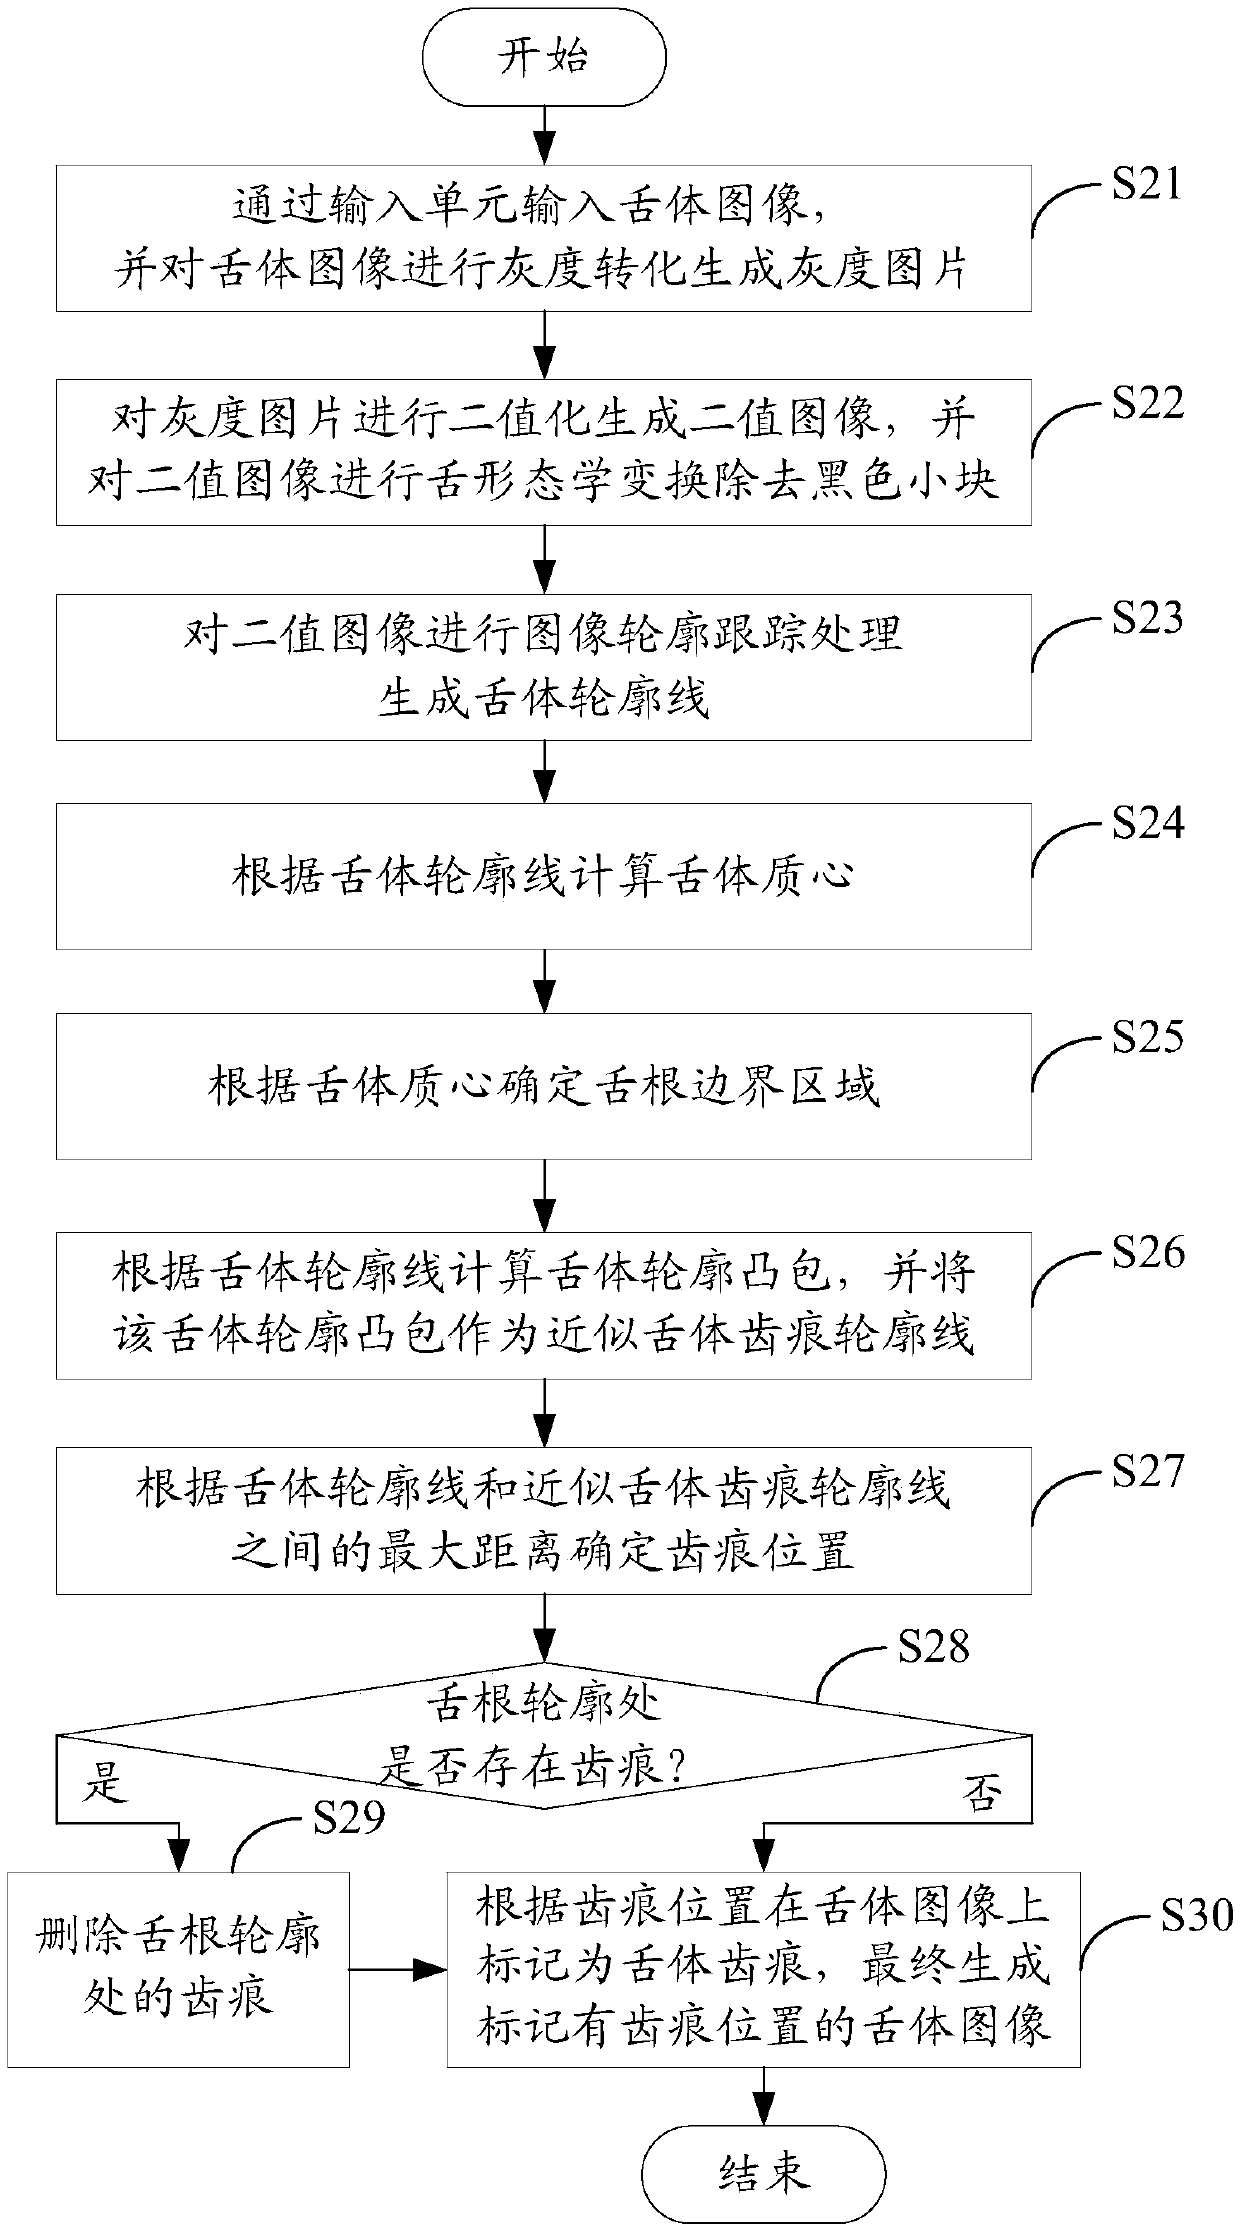 Tongue body tooth mark recognition device and method based on tongue body contour line